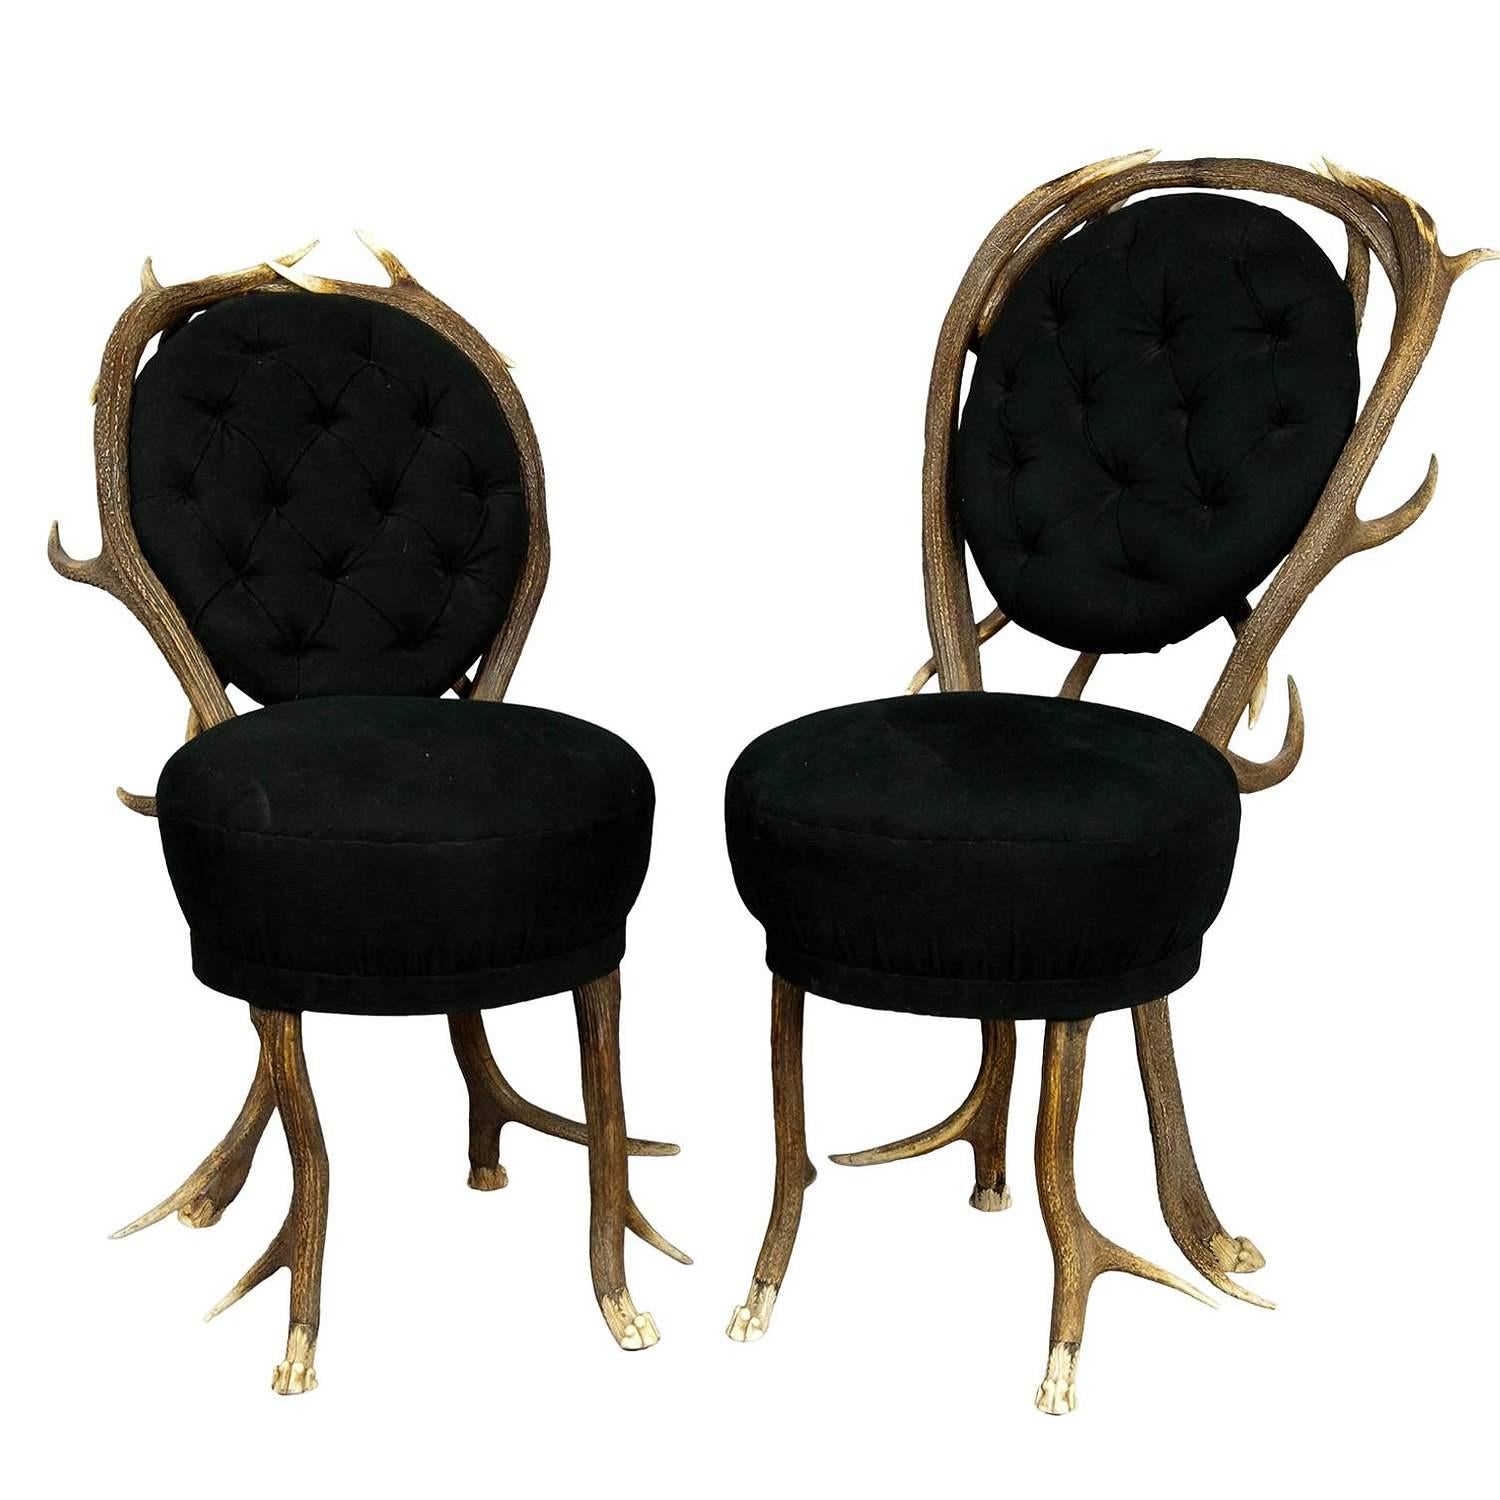 Pair of rare Antler Parlor Chairs, France ca. 1860

These two very rare antler parlor chairs are made of stag antlers with feet carved as lions claws. Made in France, ca. 1860 - the covering is renewed.

Antler furniture have been one of the popular